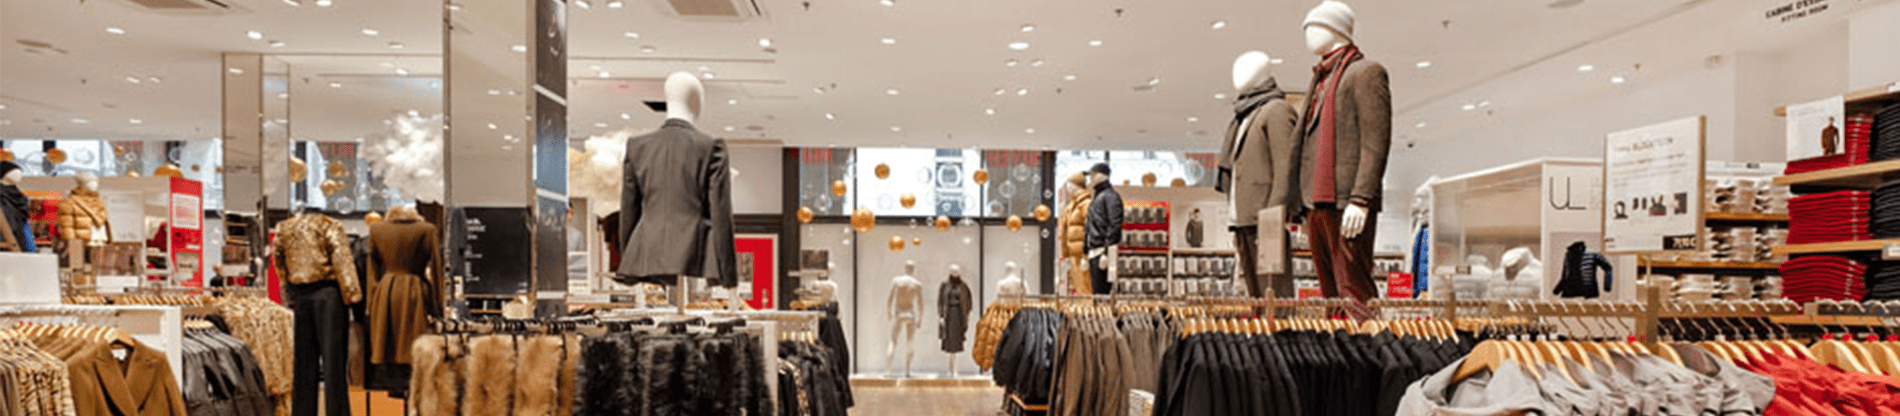 Store gallery Uniqlo opens store in historic Le Marais Paris  Gallery   Retail Week